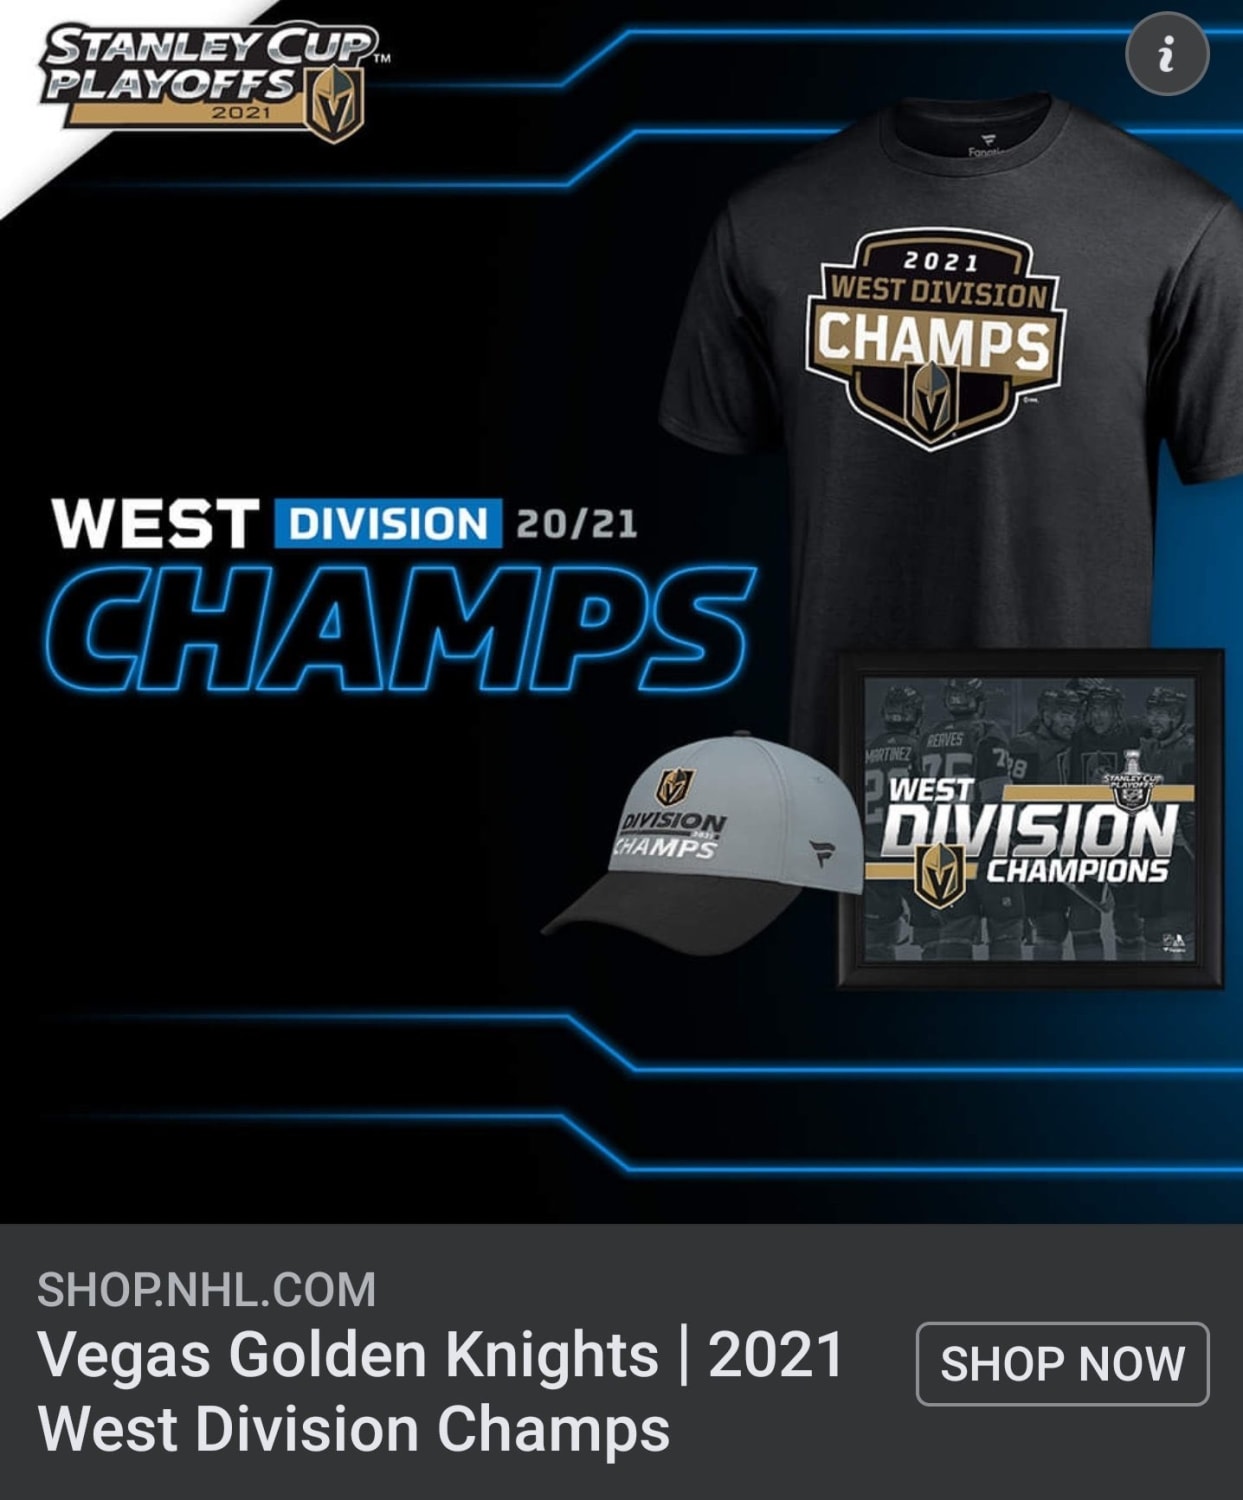 An official ad for Golden Knights division champs merchandise on sale that would be perfect........if they hadn't lost the division in a tiebreaker today